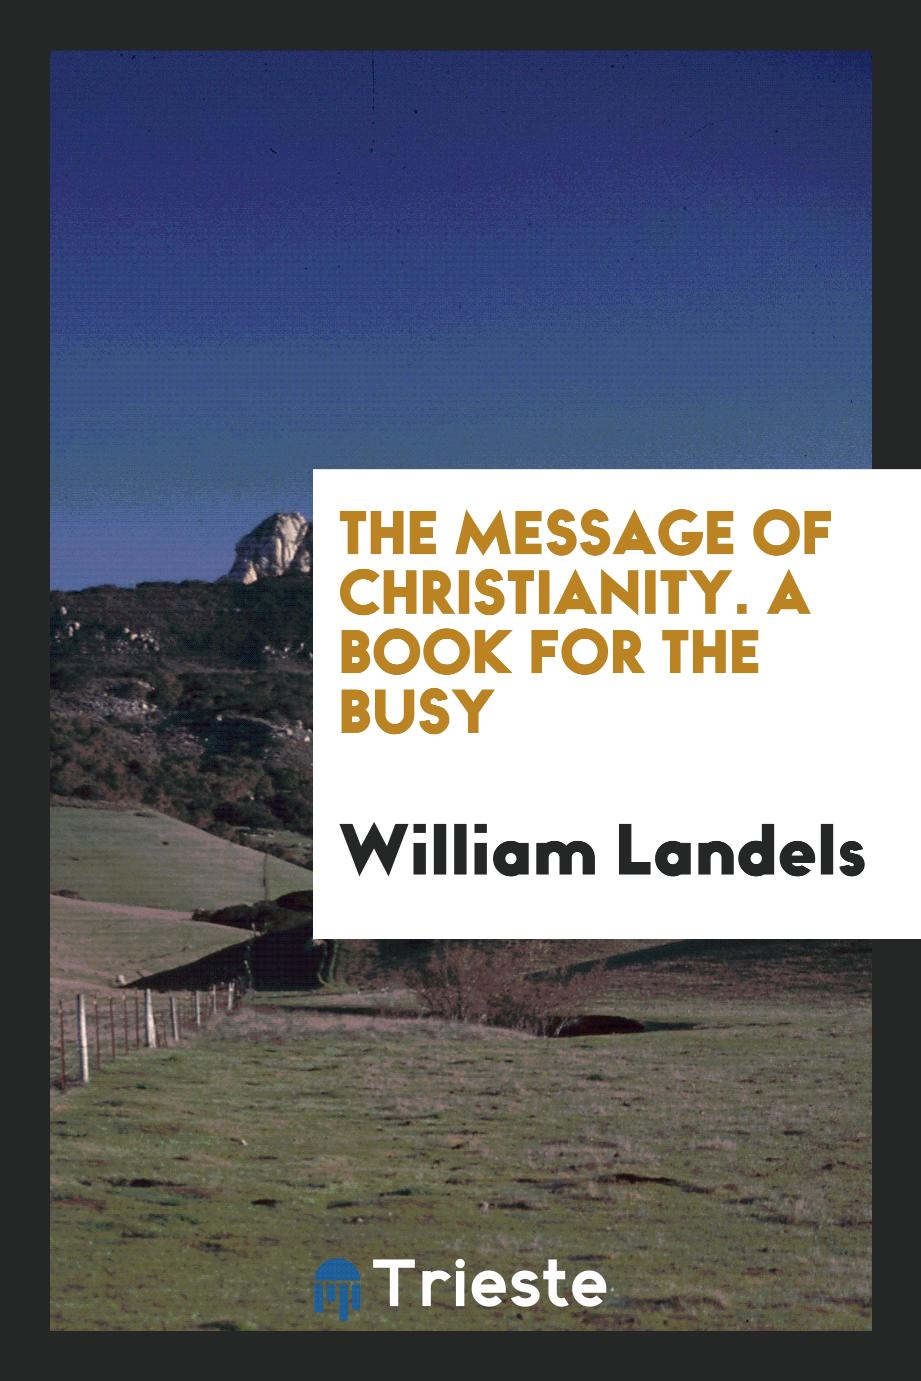 The Message of Christianity. A Book for the Busy